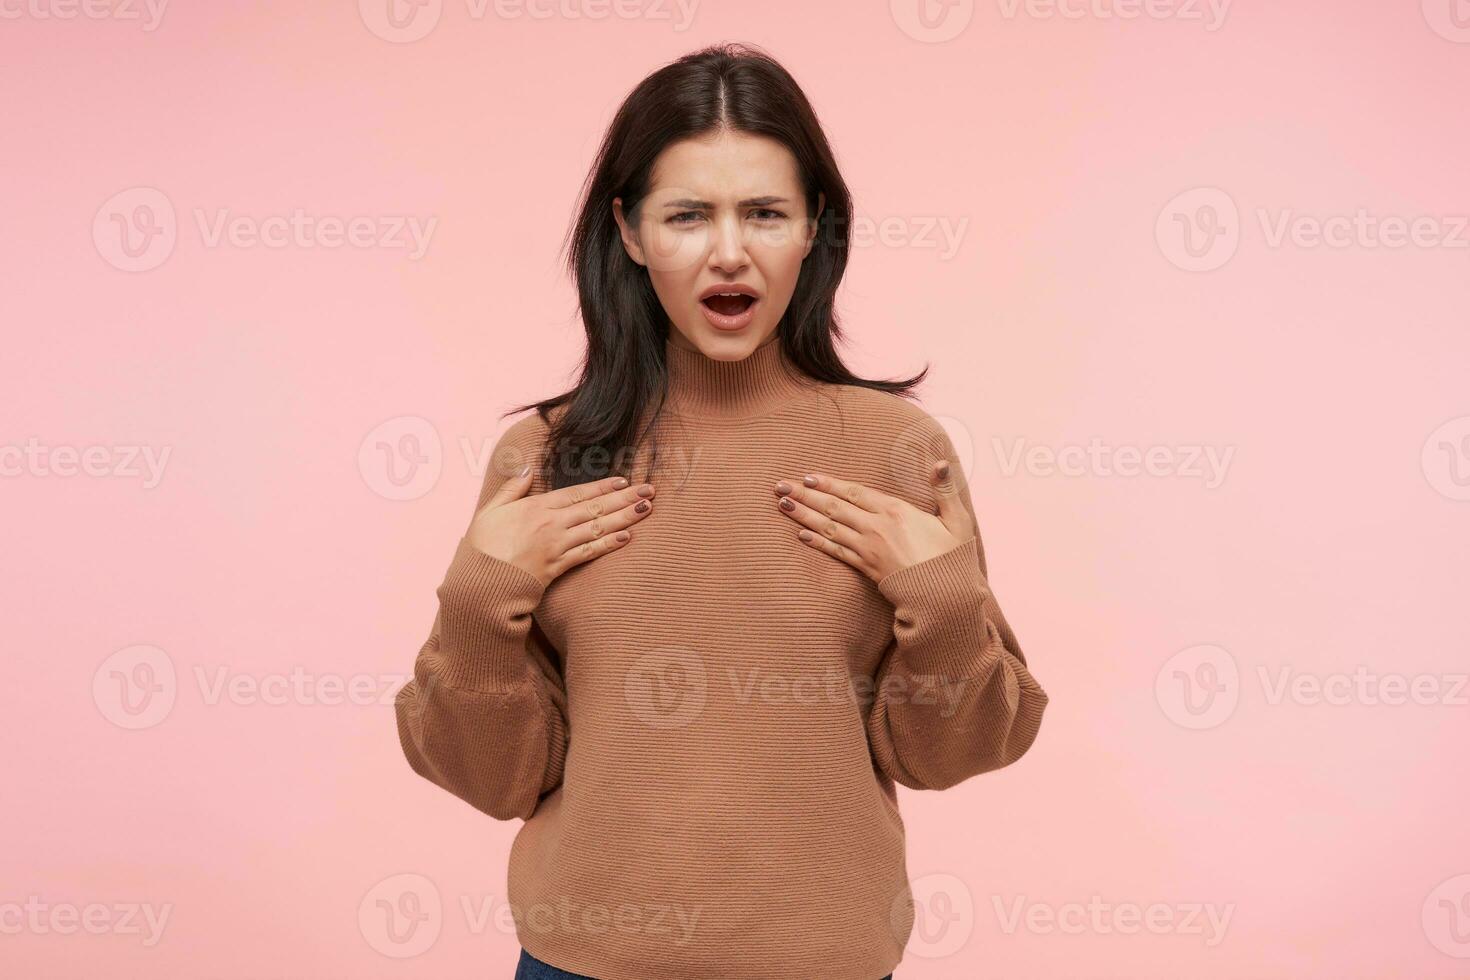 Puzzled young pretty brunette woman with casual hairstyle holding raised hands on her chest and squinting eyes while looking confusedly at camera, isolated over pink background photo